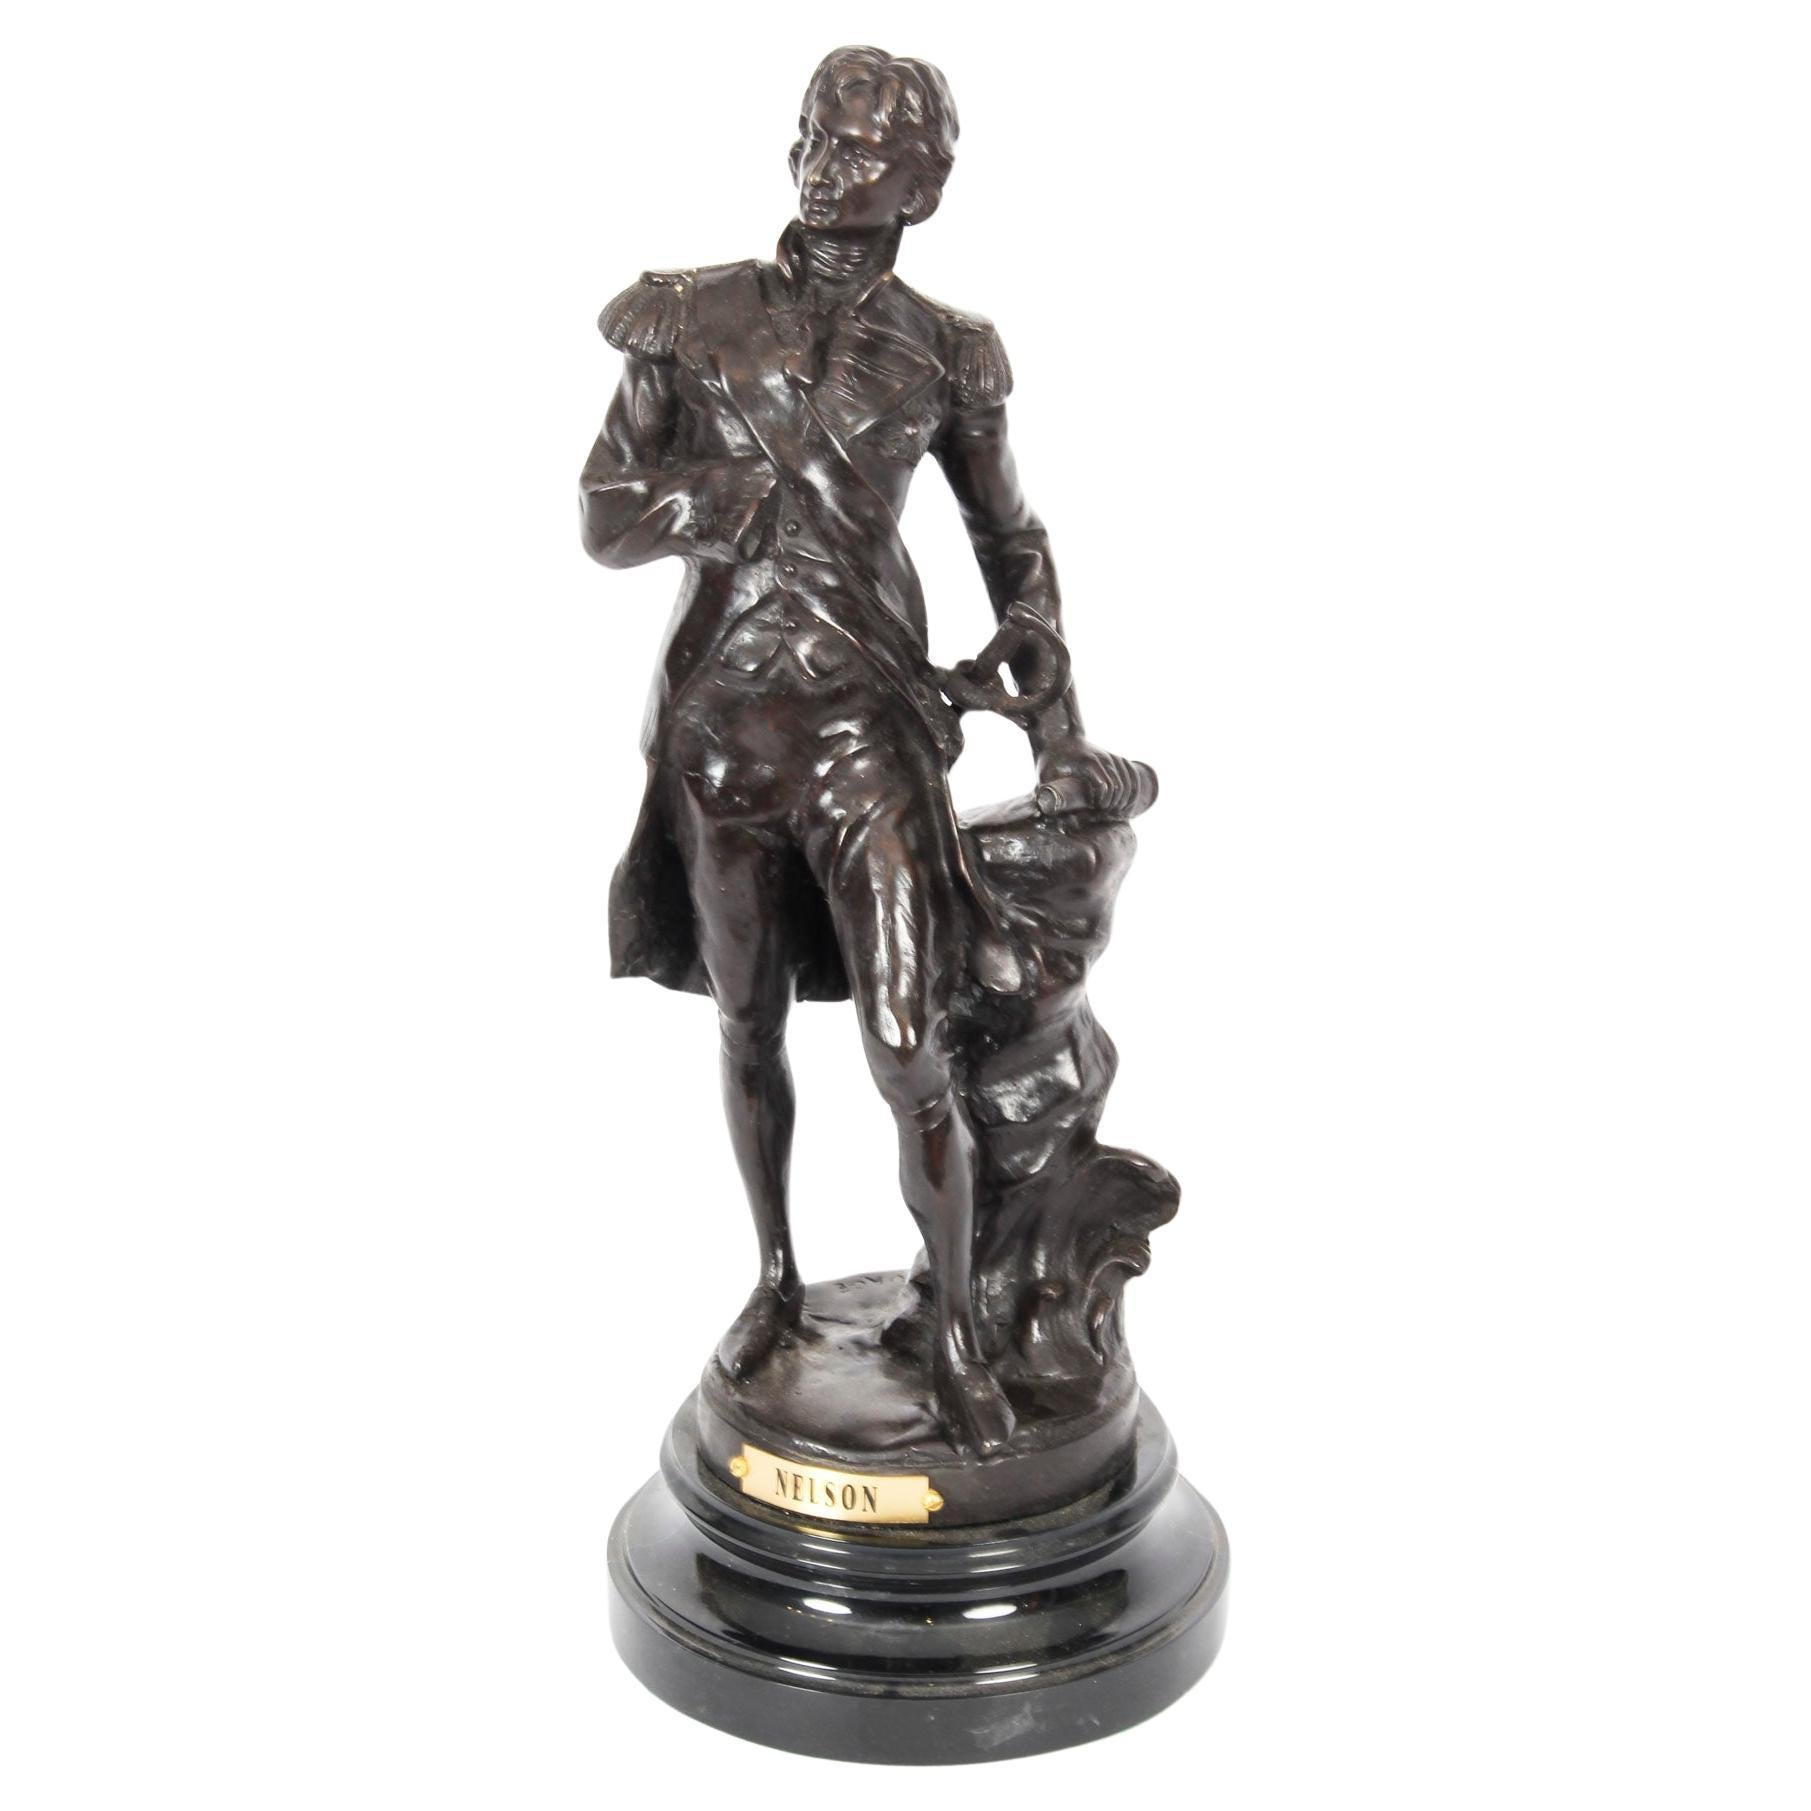 Vintage Bronze Sculpture of Nelson 20th Century For Sale